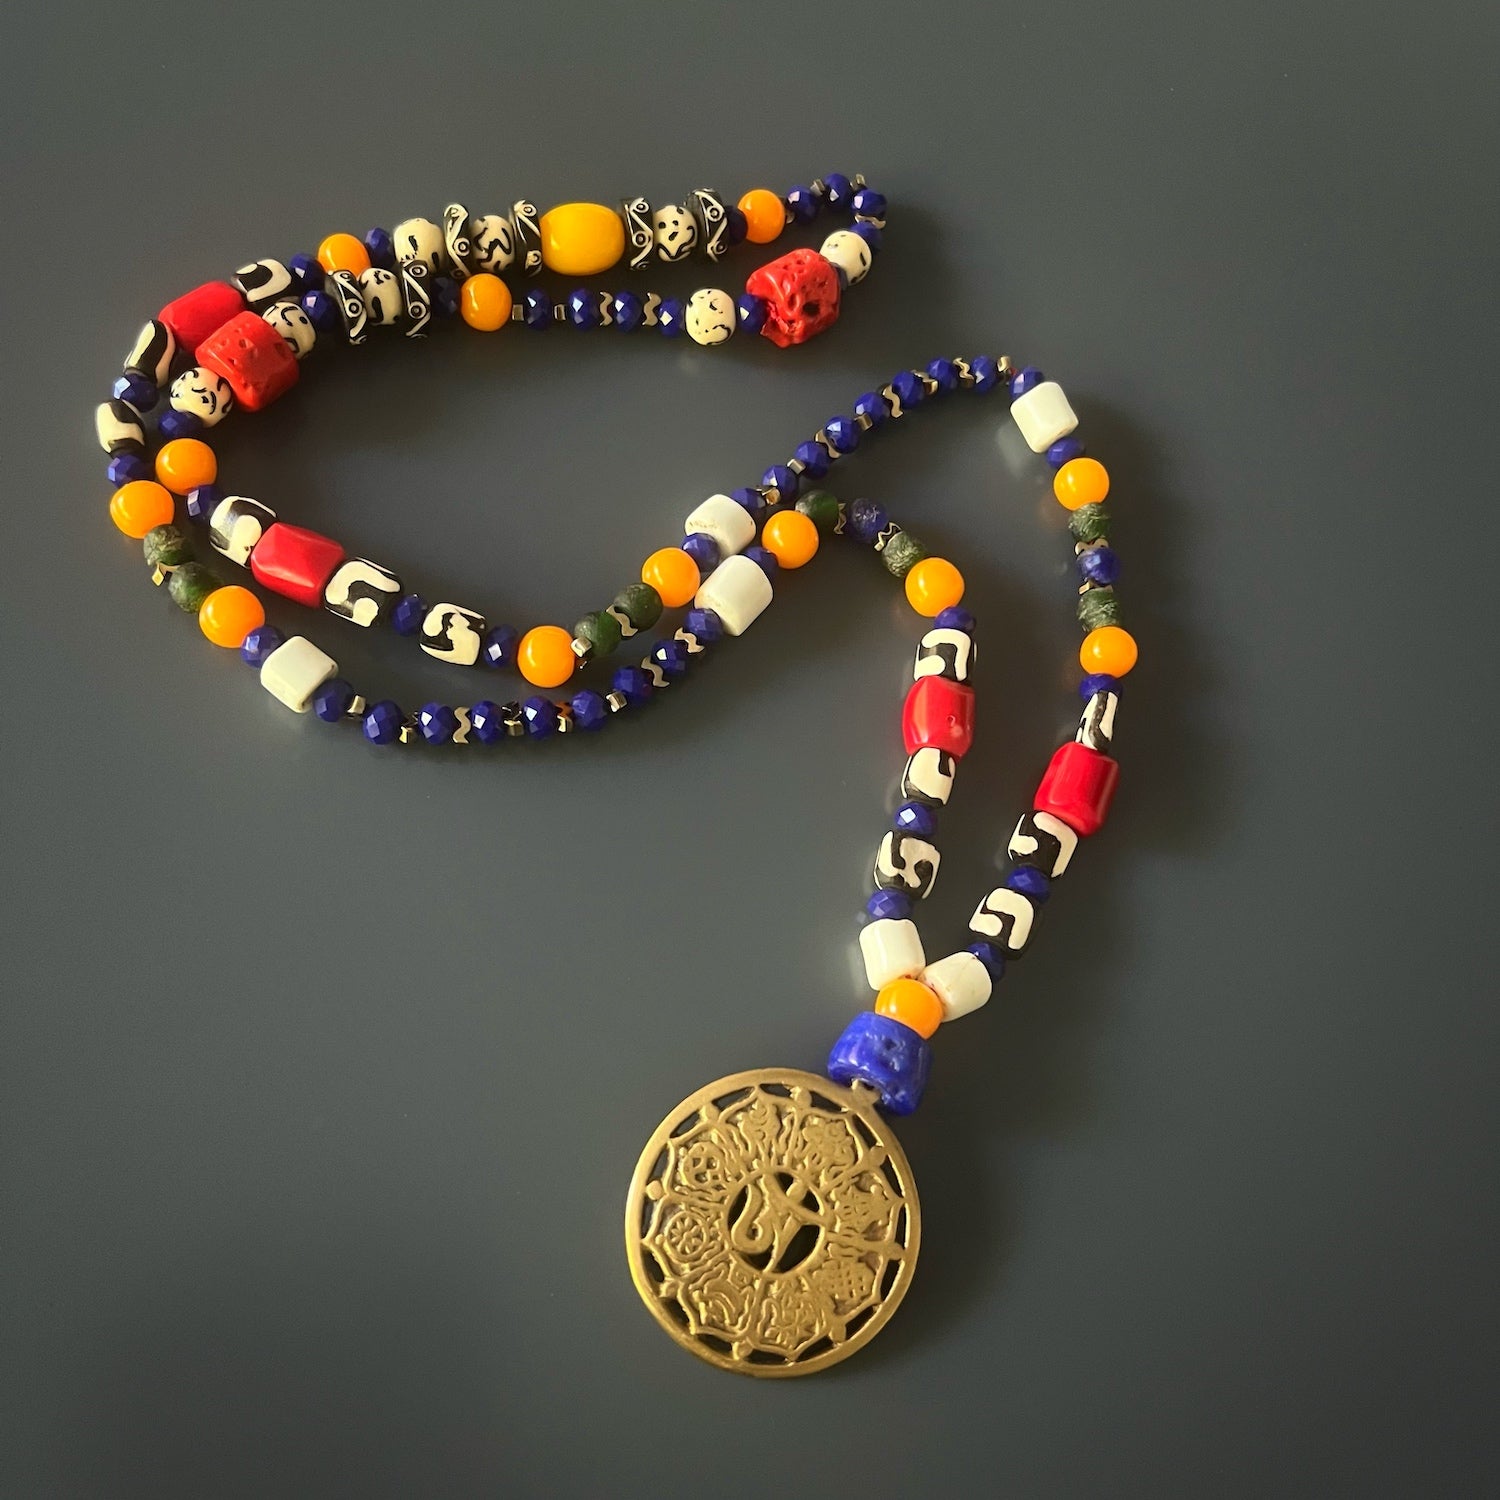 Embrace the spiritual journey with the Yoga Necklace, featuring a beautiful OM pendant and carefully selected beads.